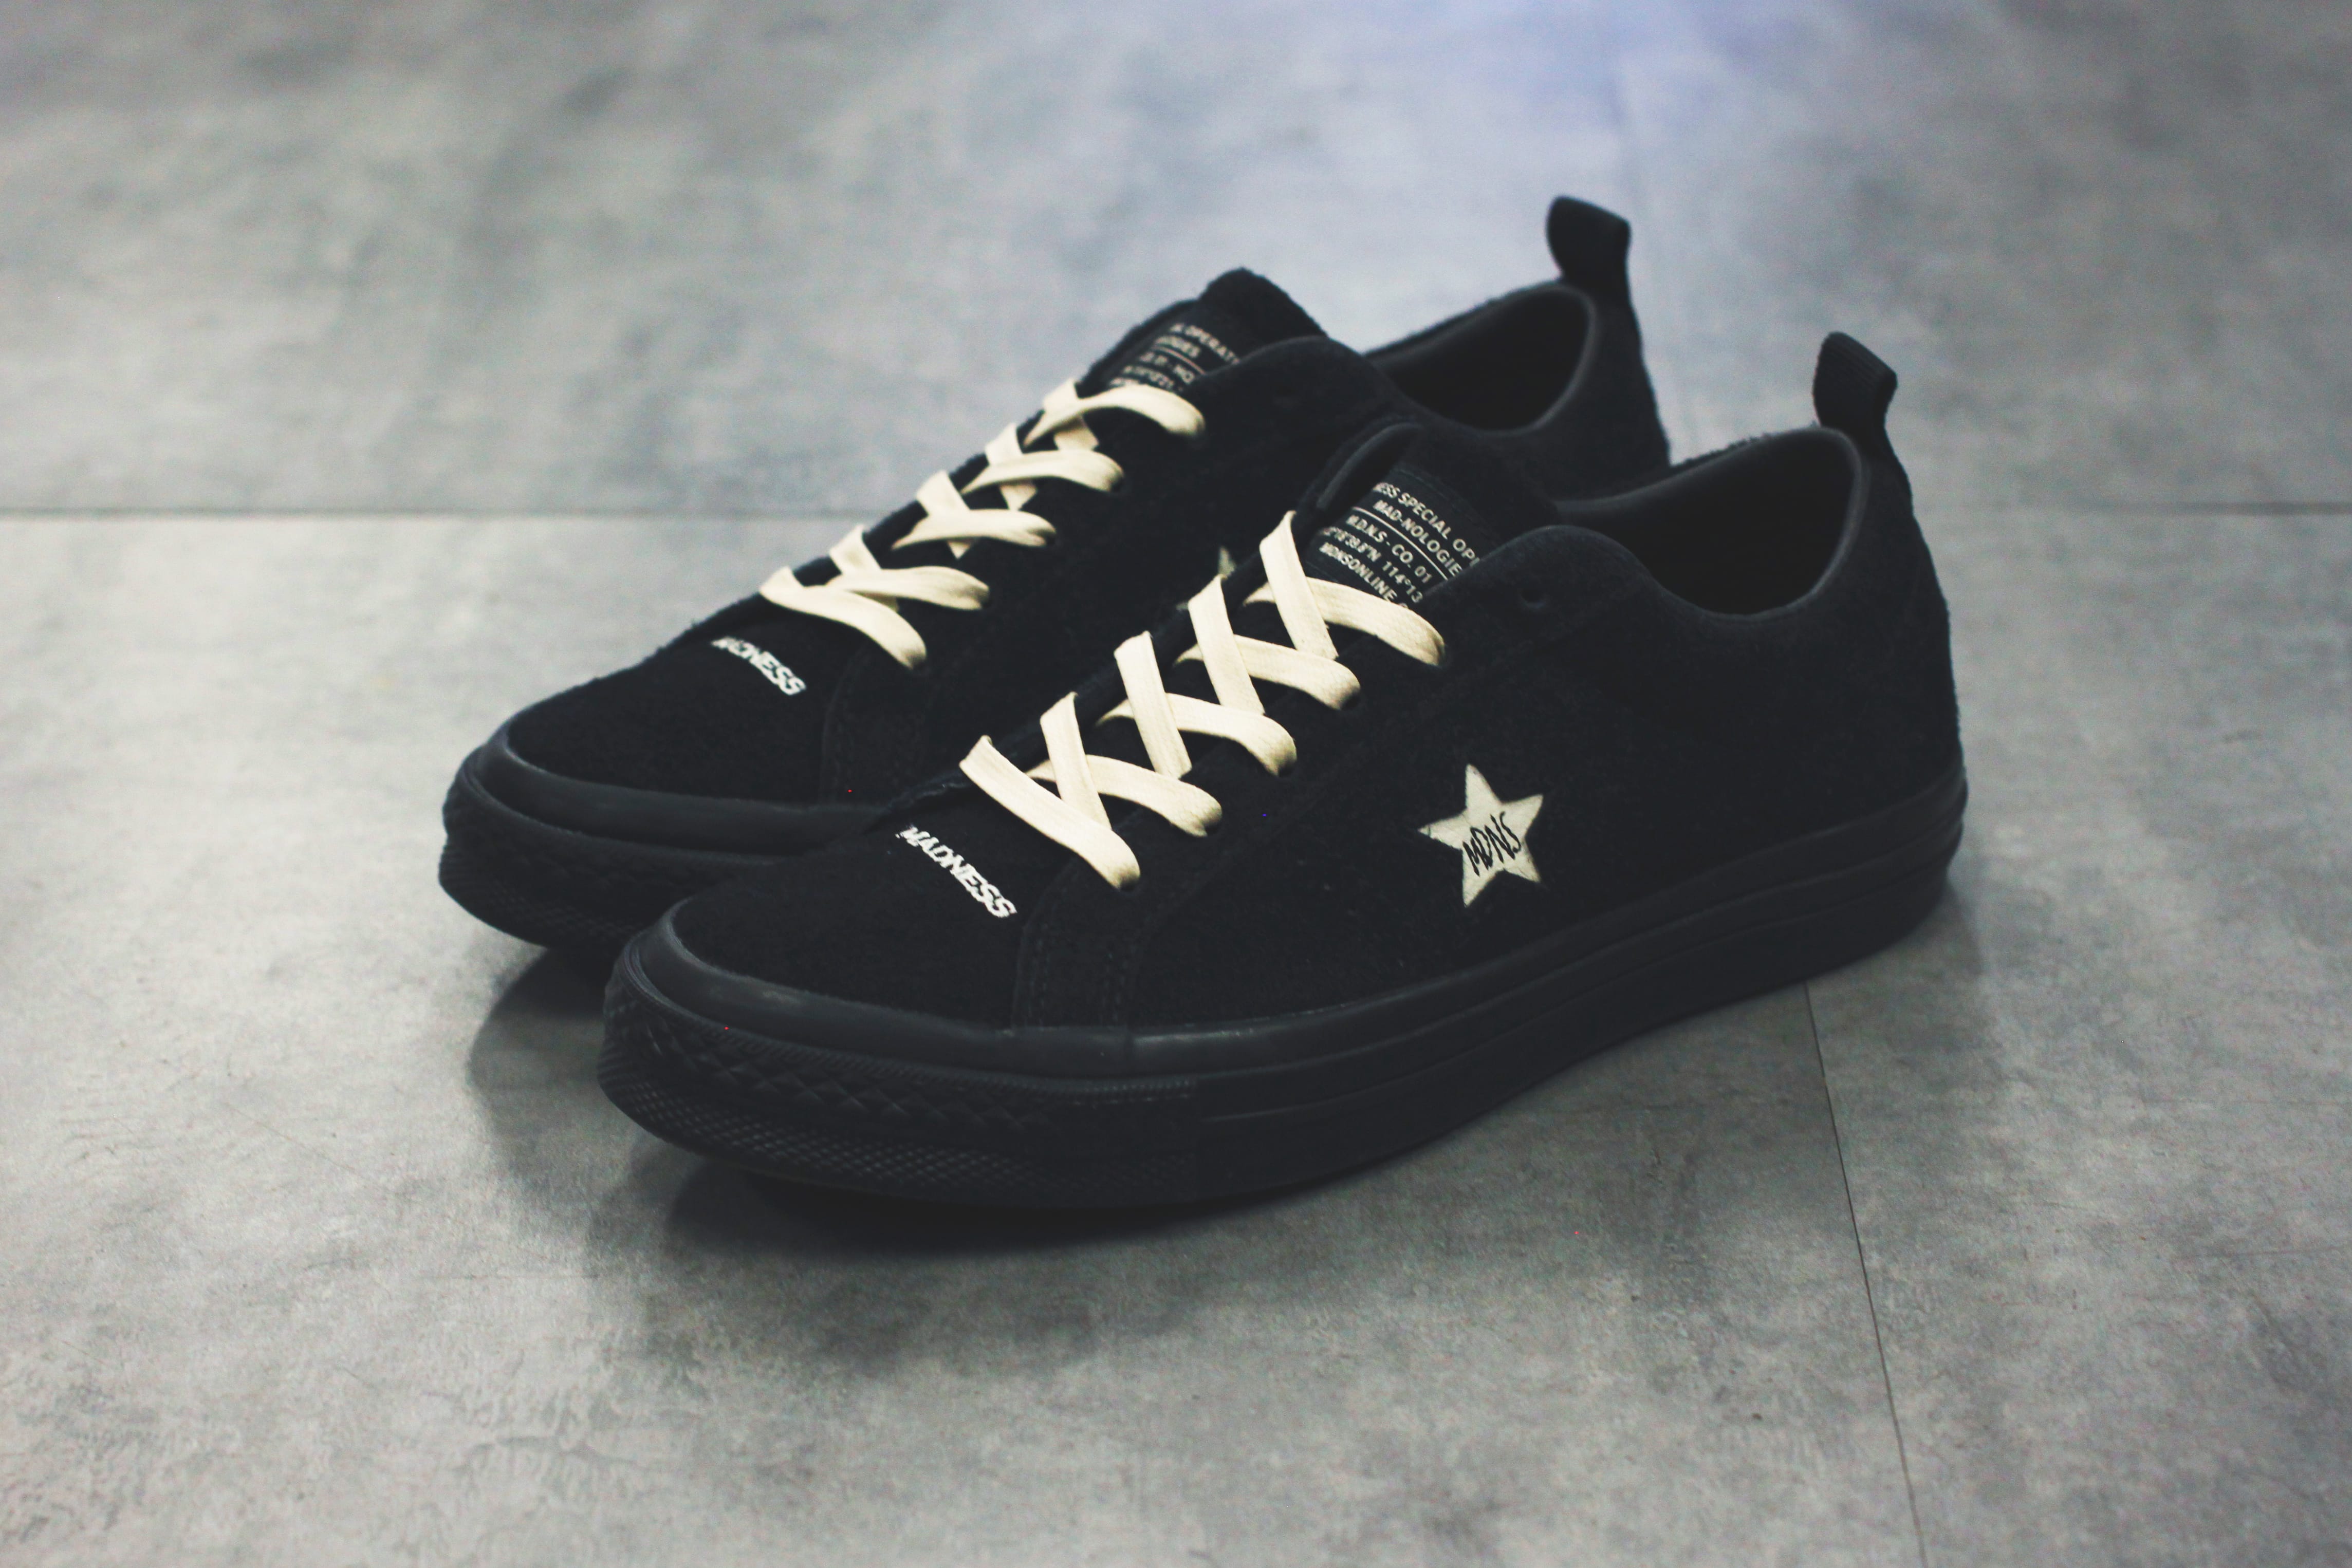 madness x converse one star